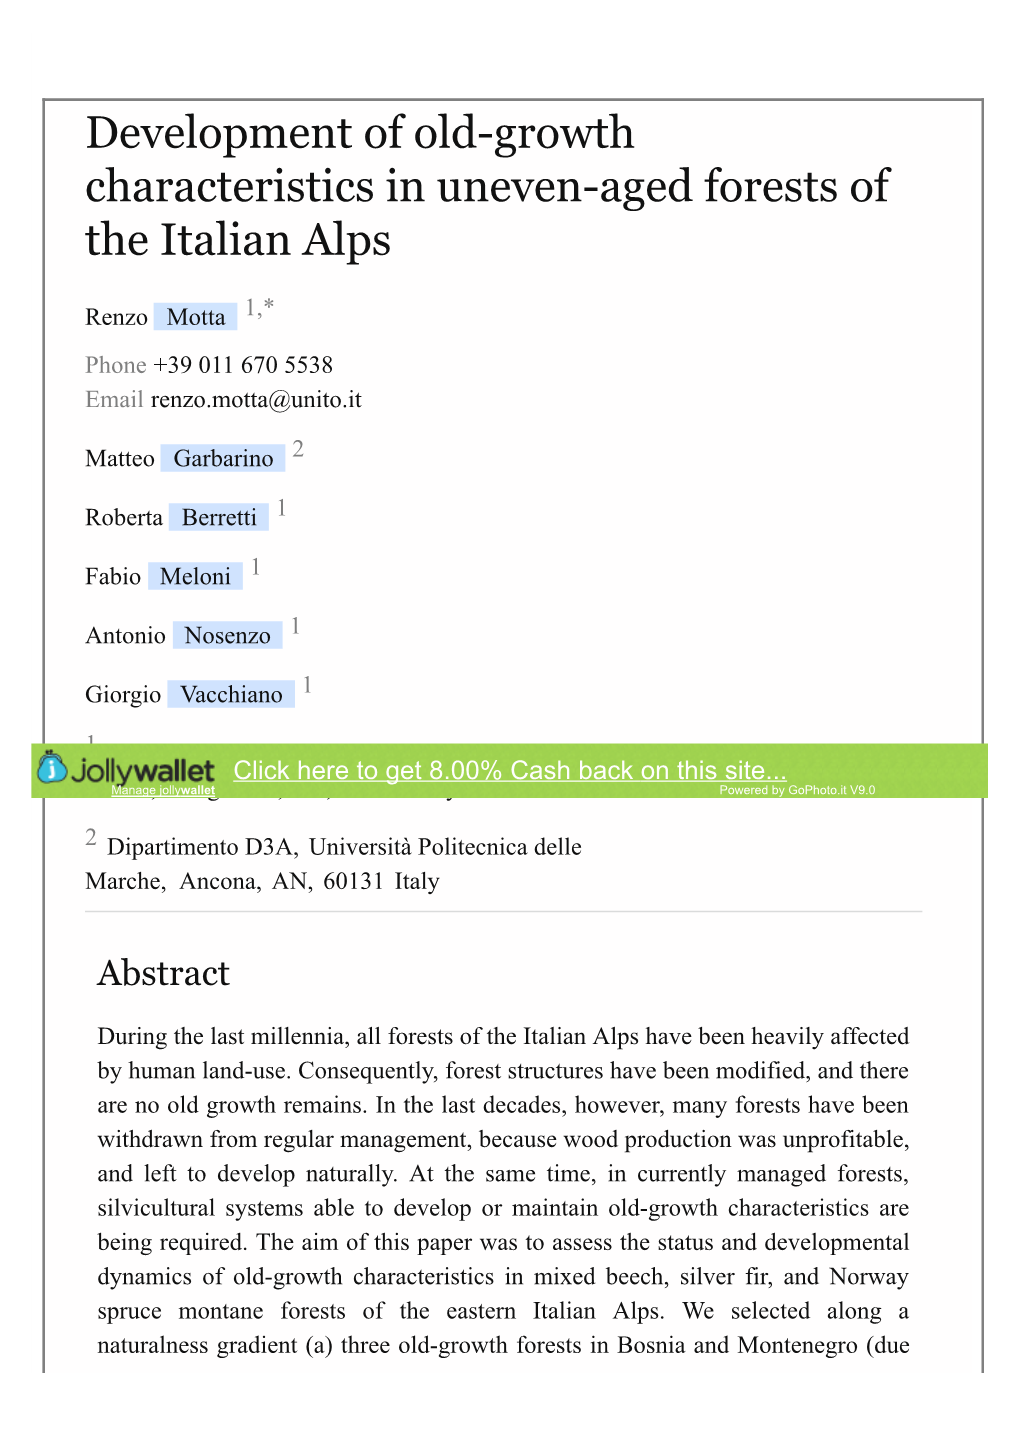 Development of Old-Growth Characteristics in Uneven-Aged Forests of the Italian Alps